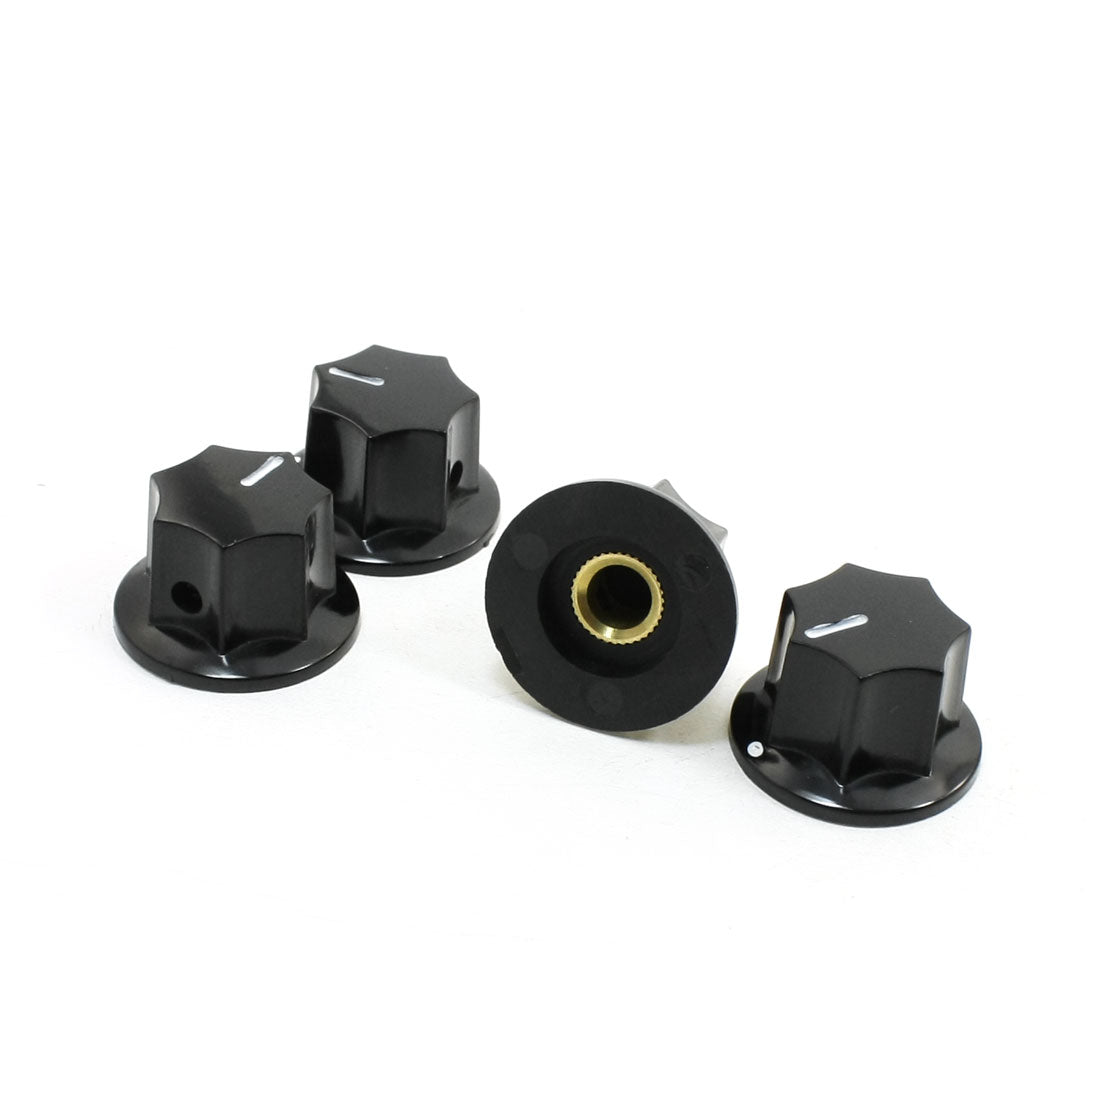 uxcell Uxcell 4 Pcs Black 24mm Dia Rotary Knobs for 6mm Dia. Shaft Potentiometer